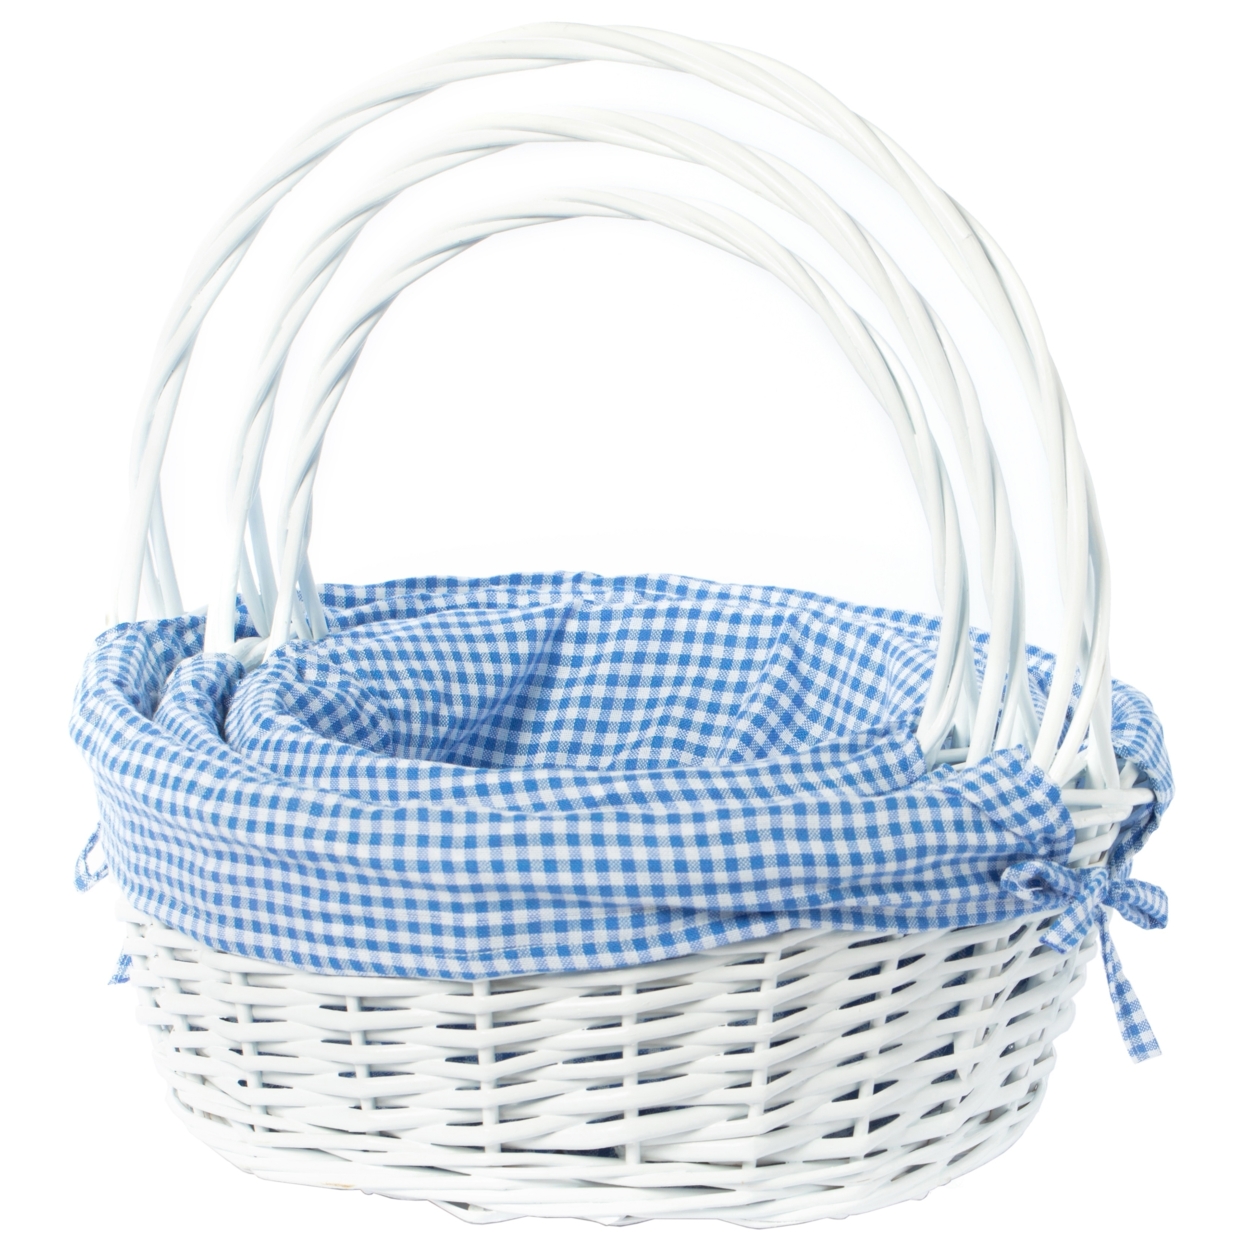 White Round Willow Gift Basket, With Blue And White Gingham Liner And Handles - Blue Small